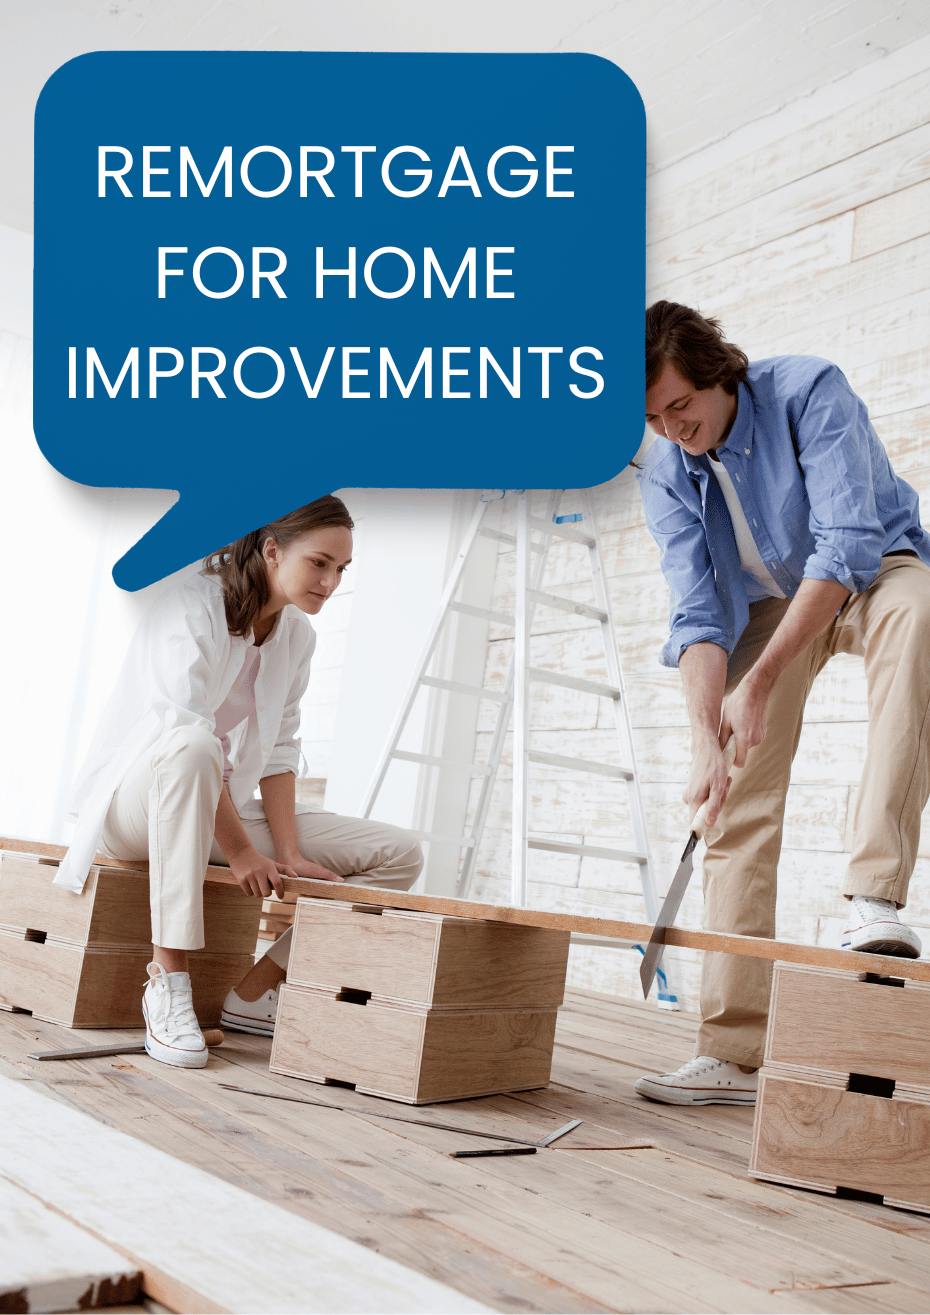 Remortgage for home improvements